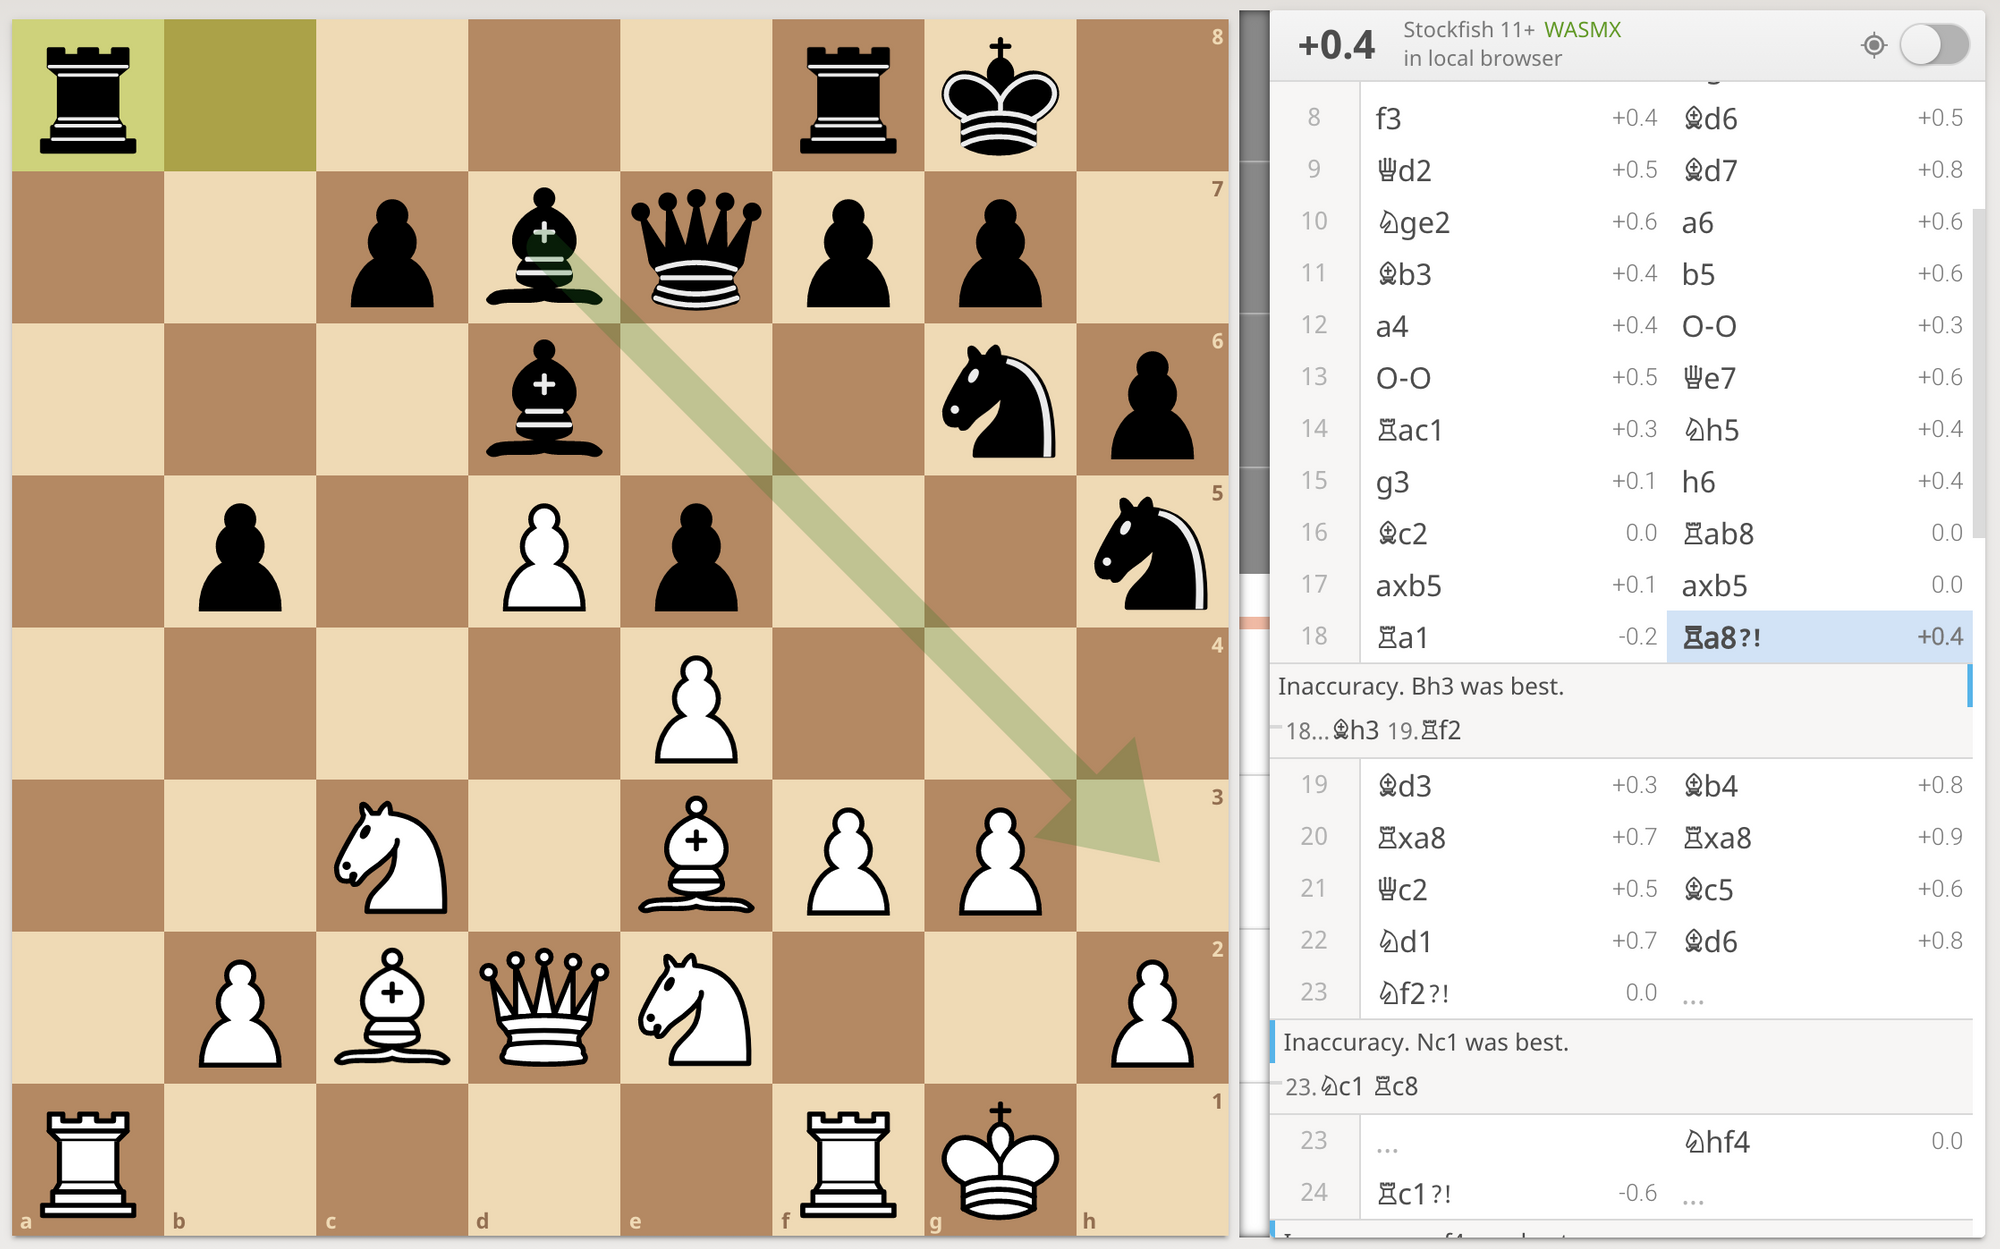 What is the algorithm behind Stockfish, the chess engine? - Quora